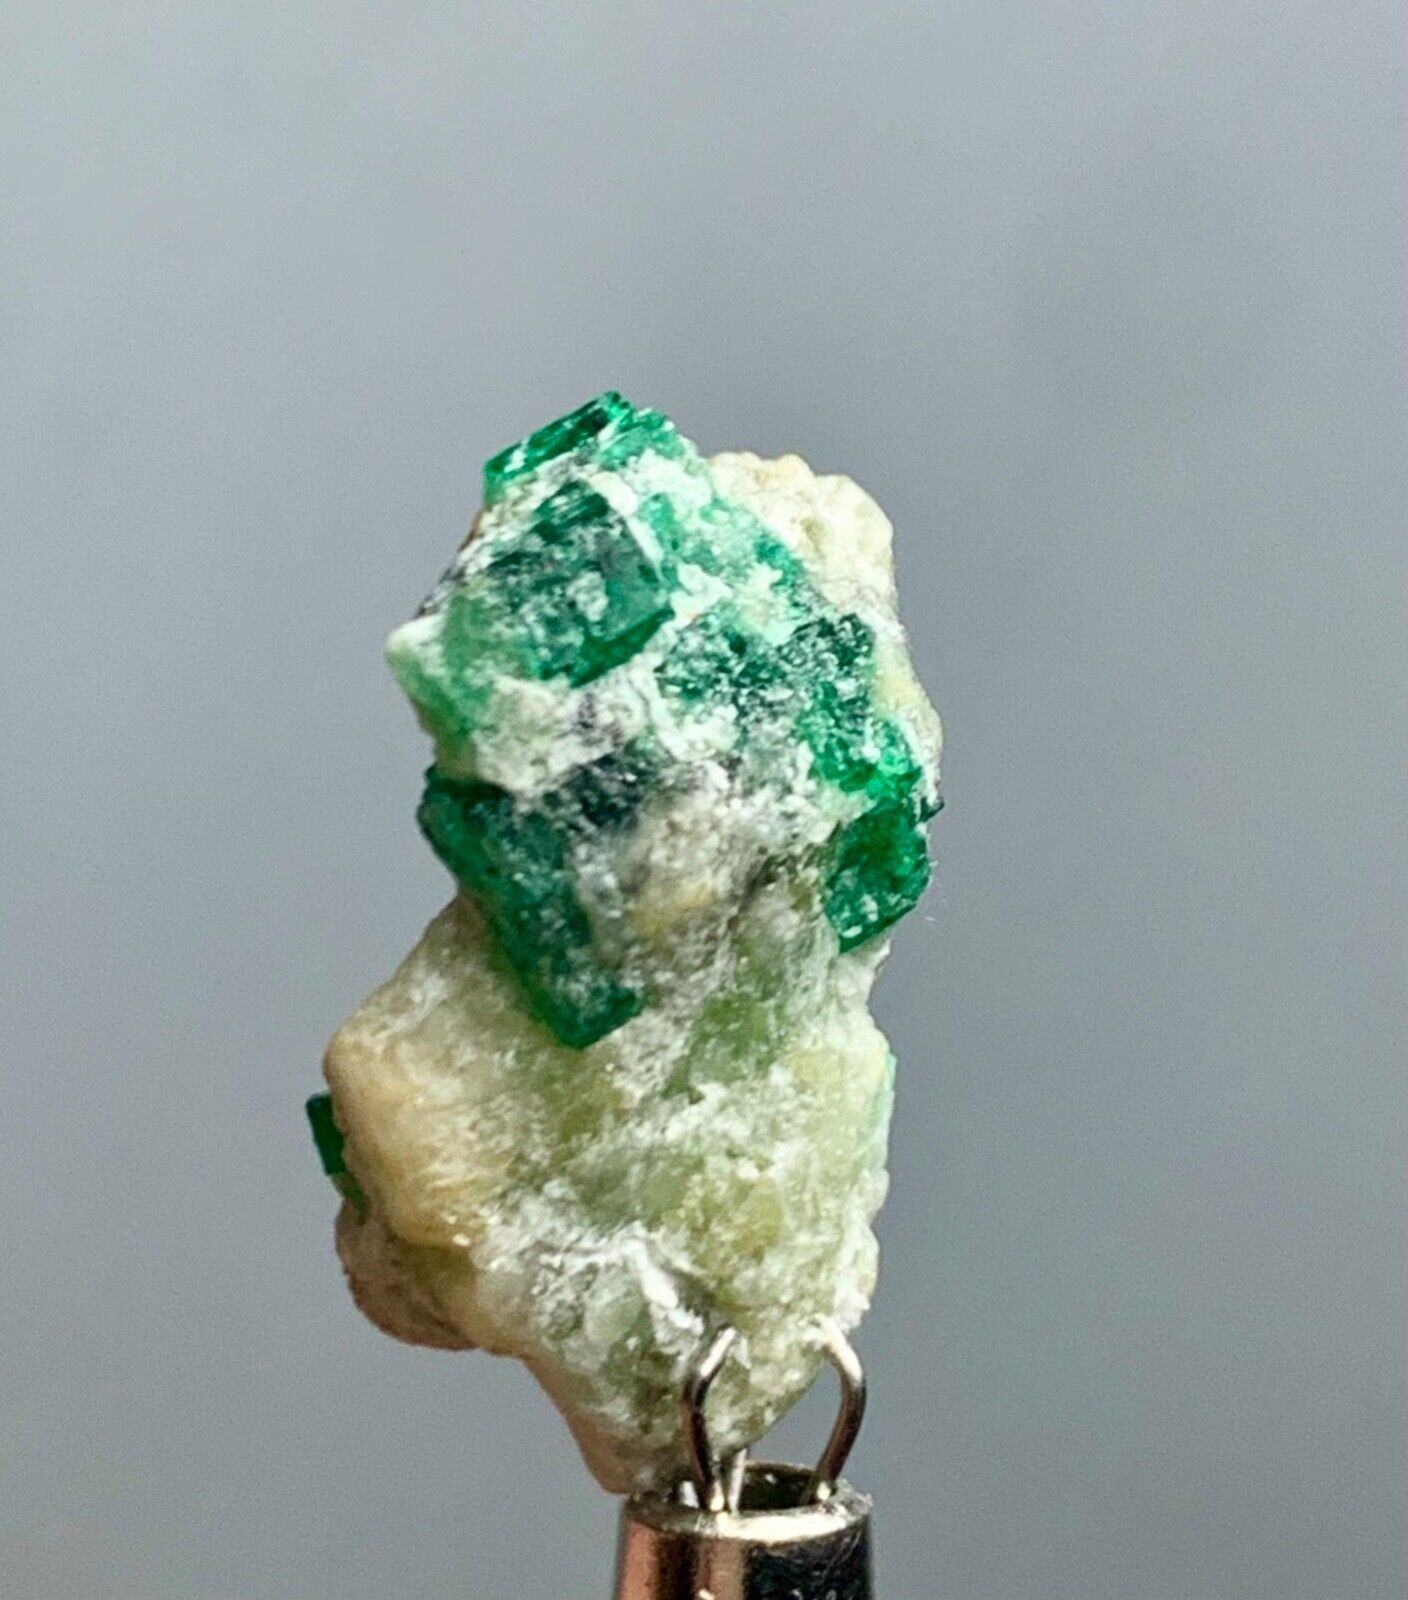 16 Cts Emerald Crystal specimen From Pakistan